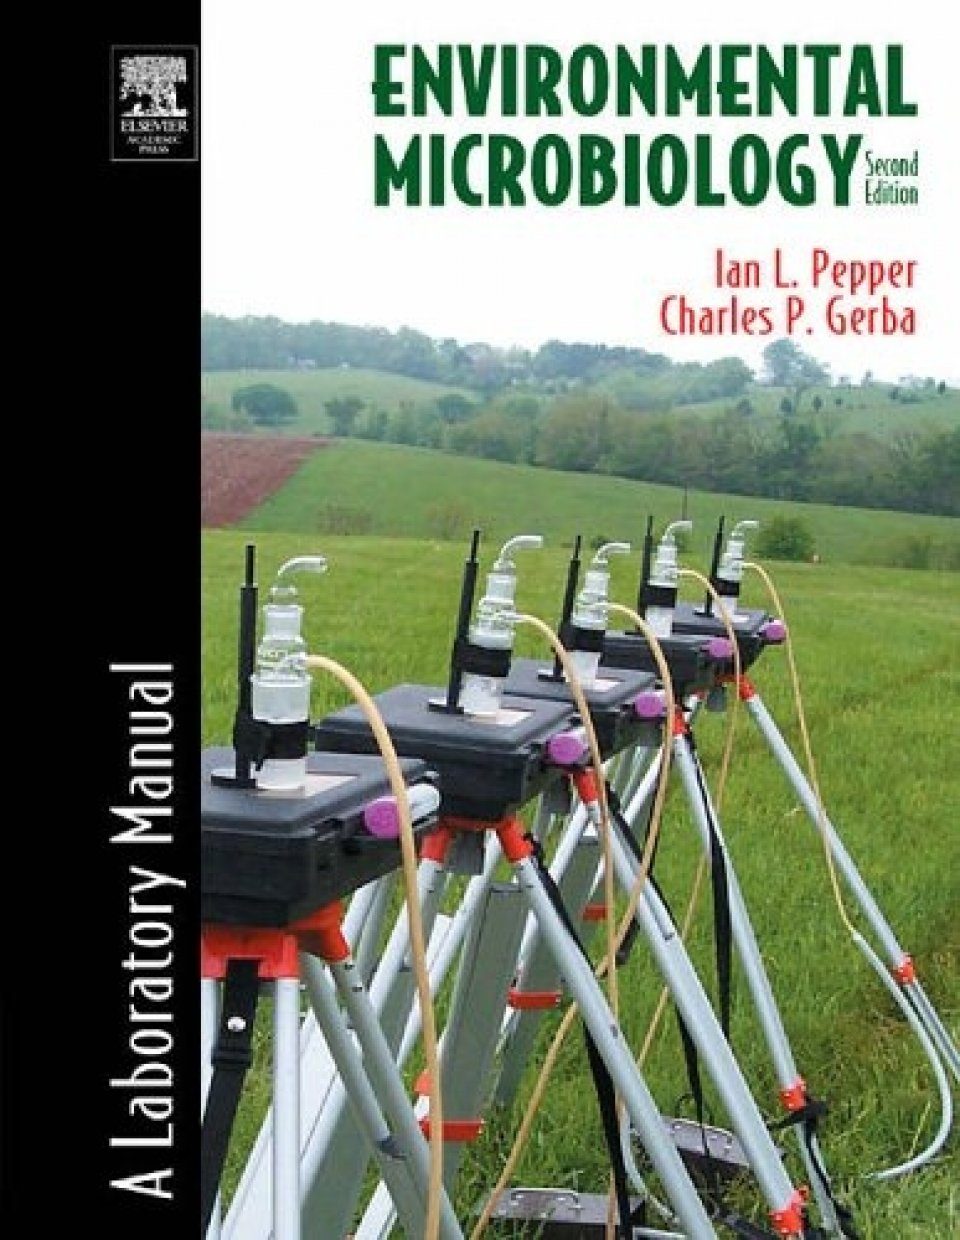 research about environmental microbiology